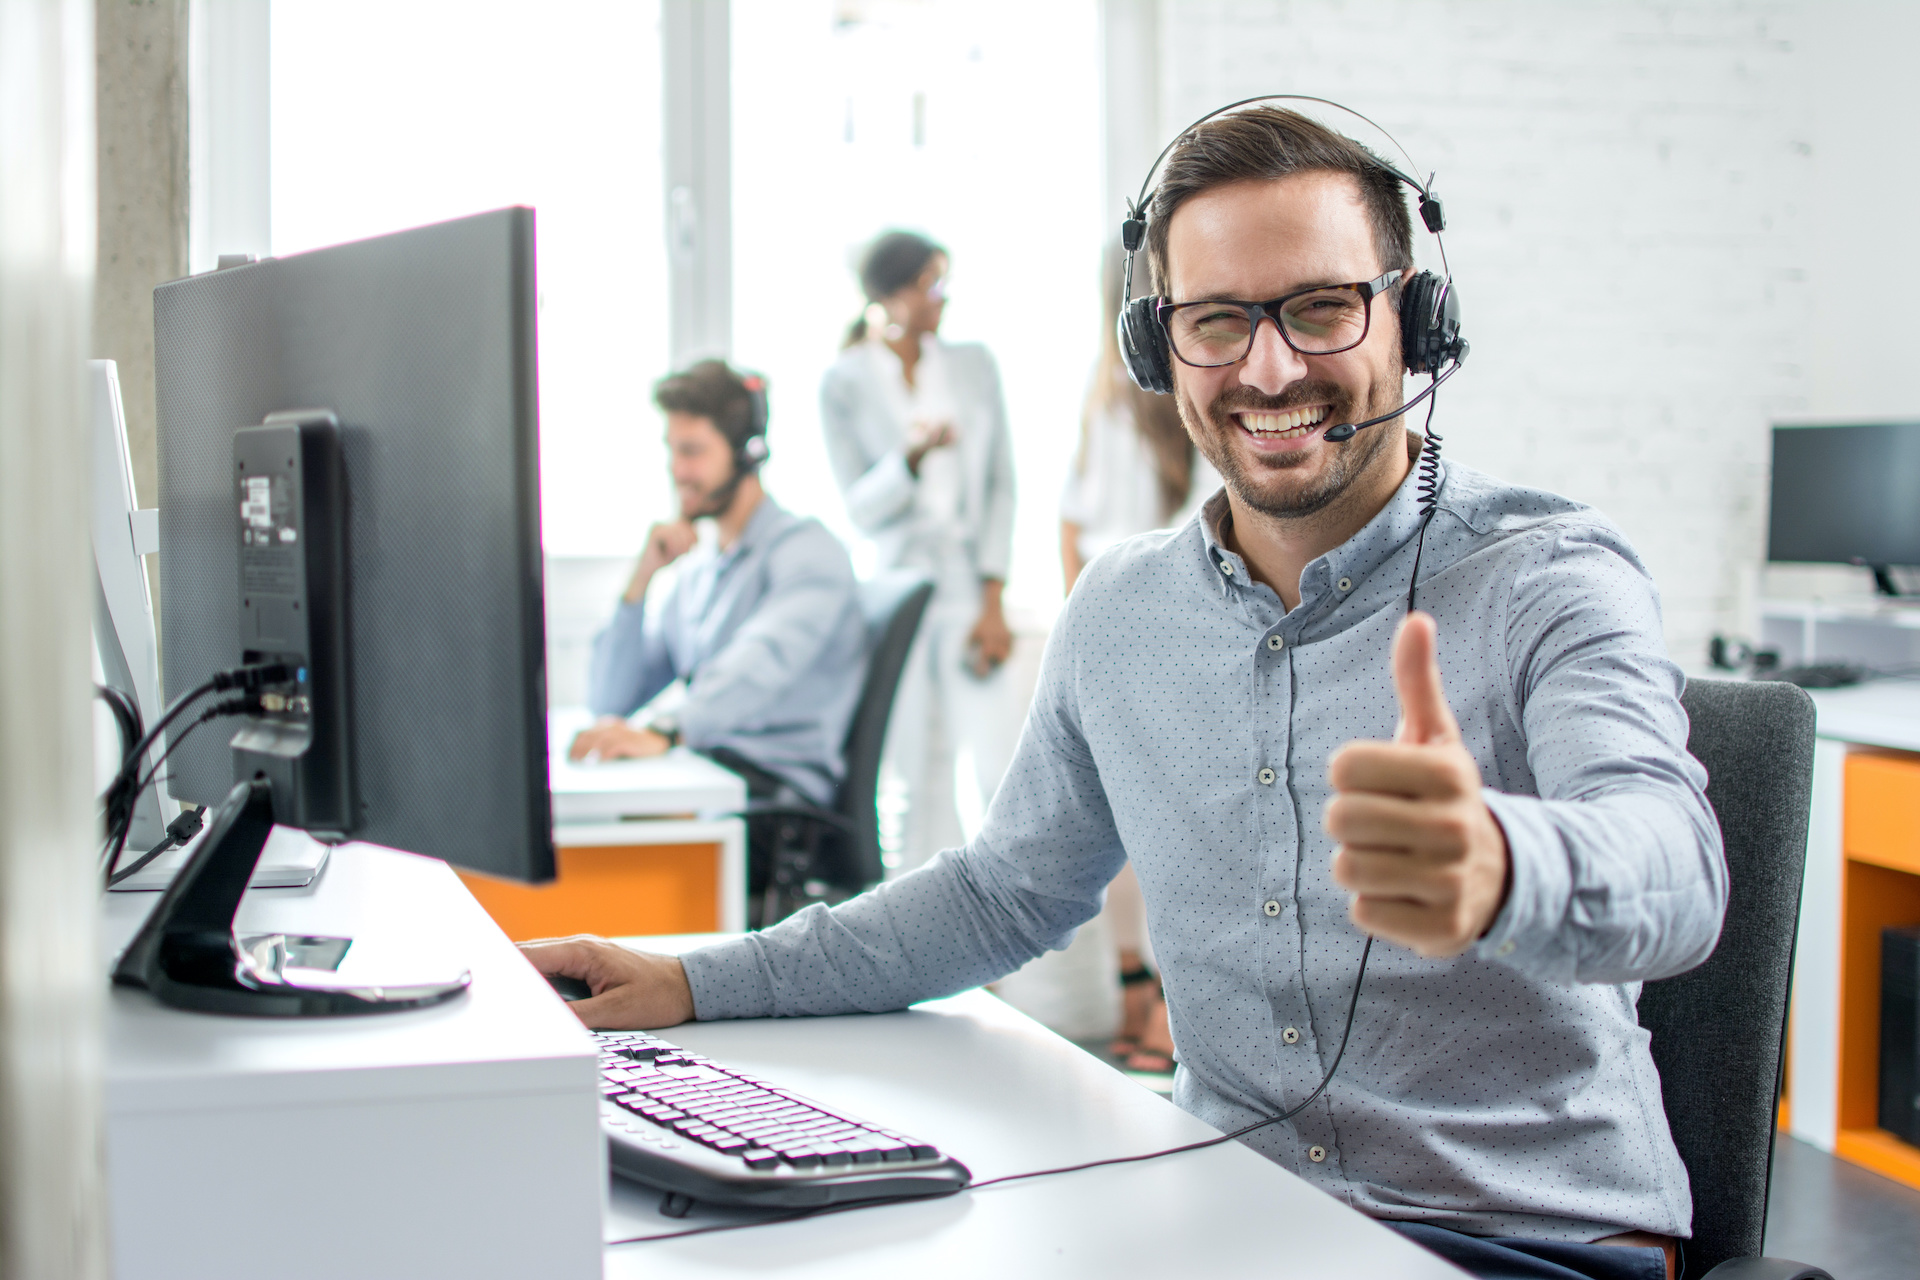 a man wearing headphones giving a thumbs up